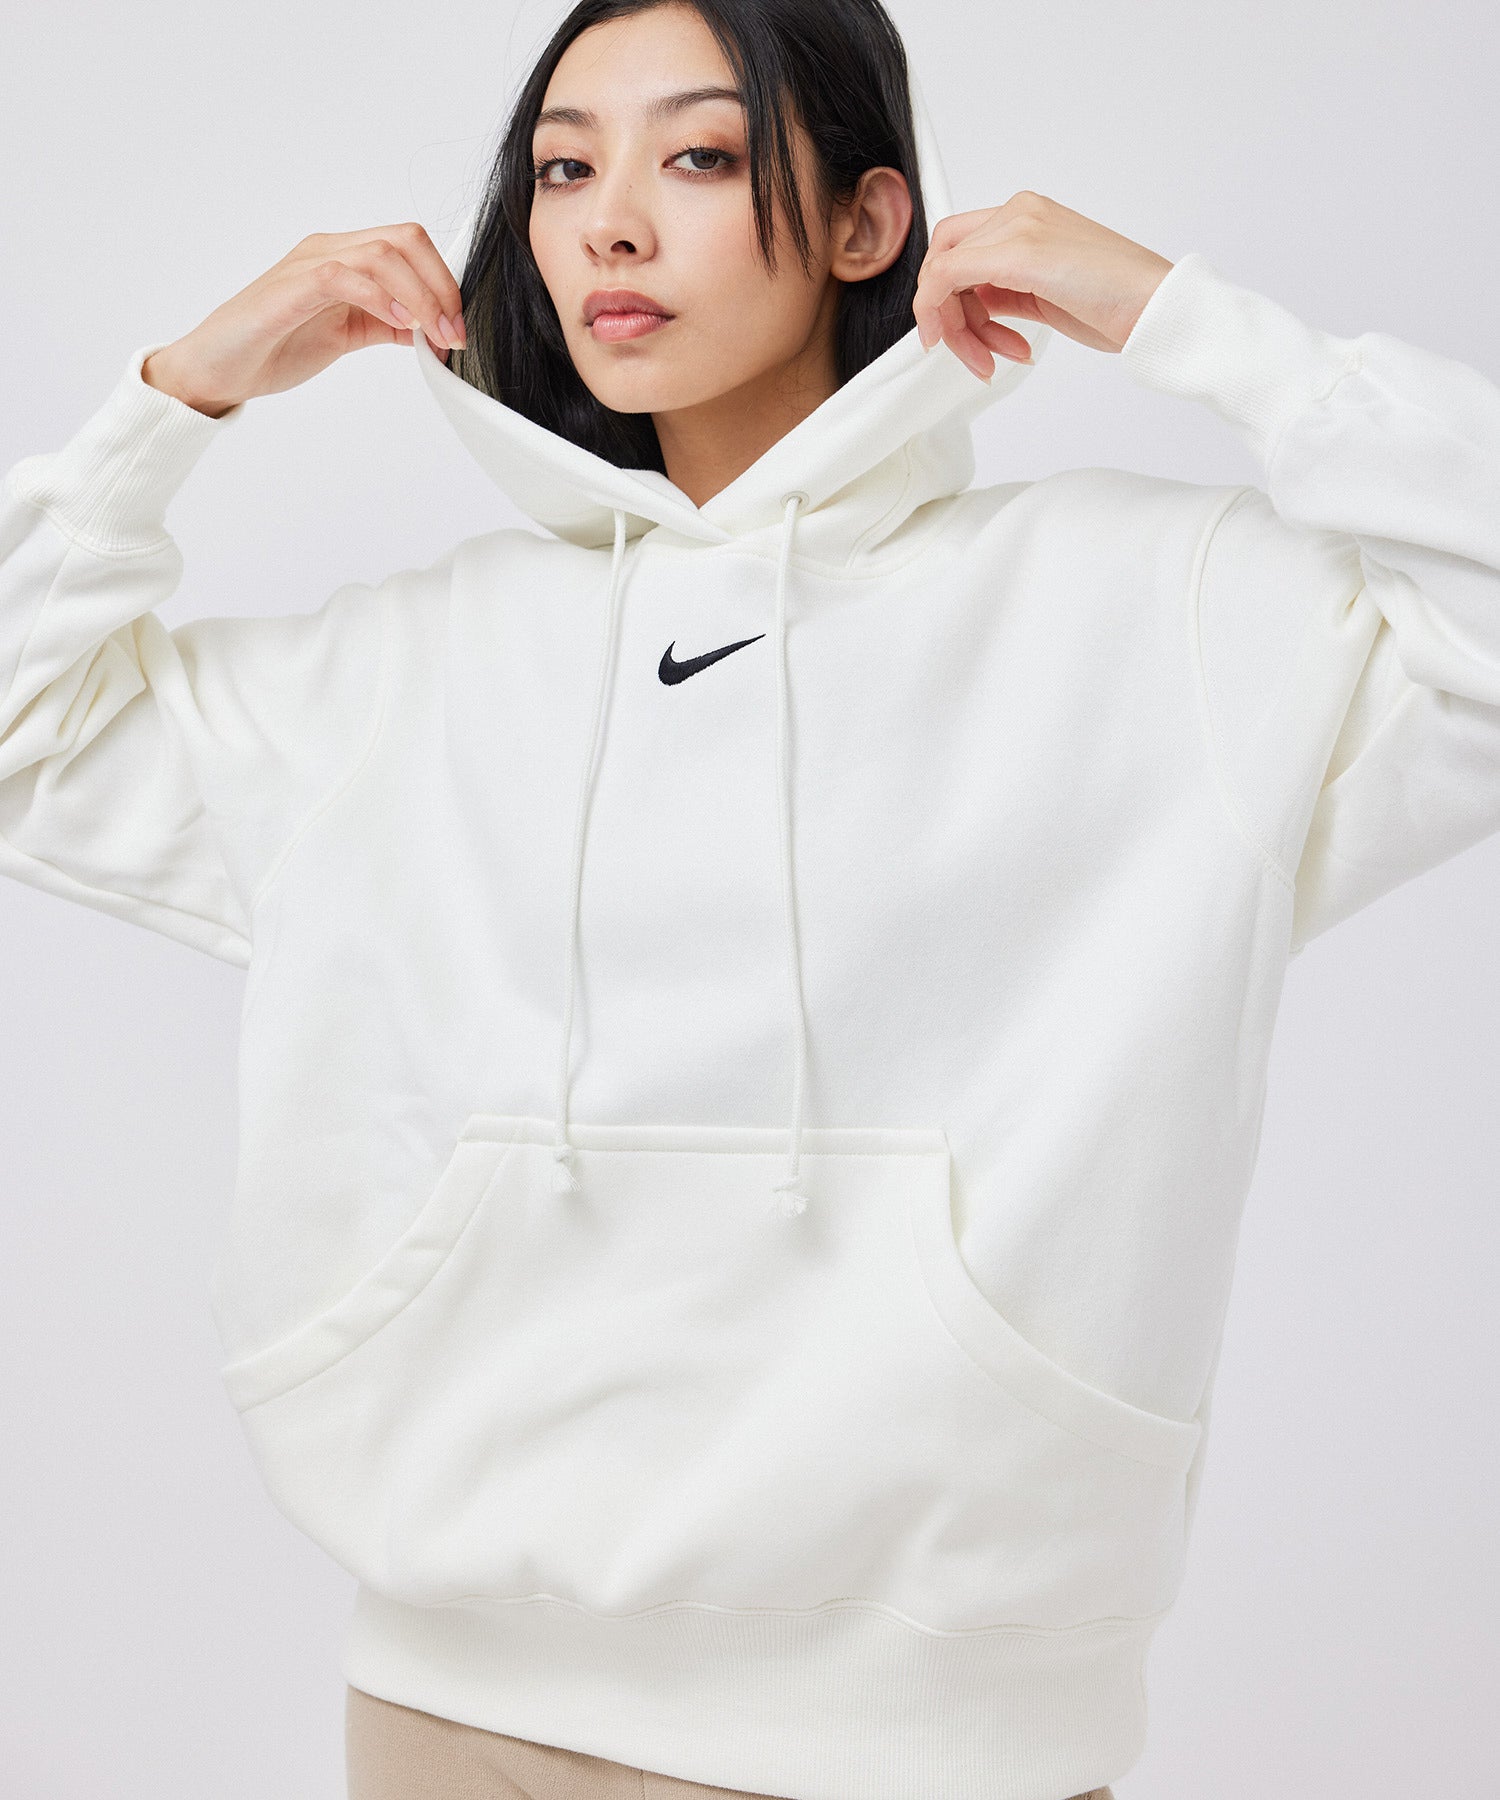 NIKE | Life and Beauty by JUNONLINE